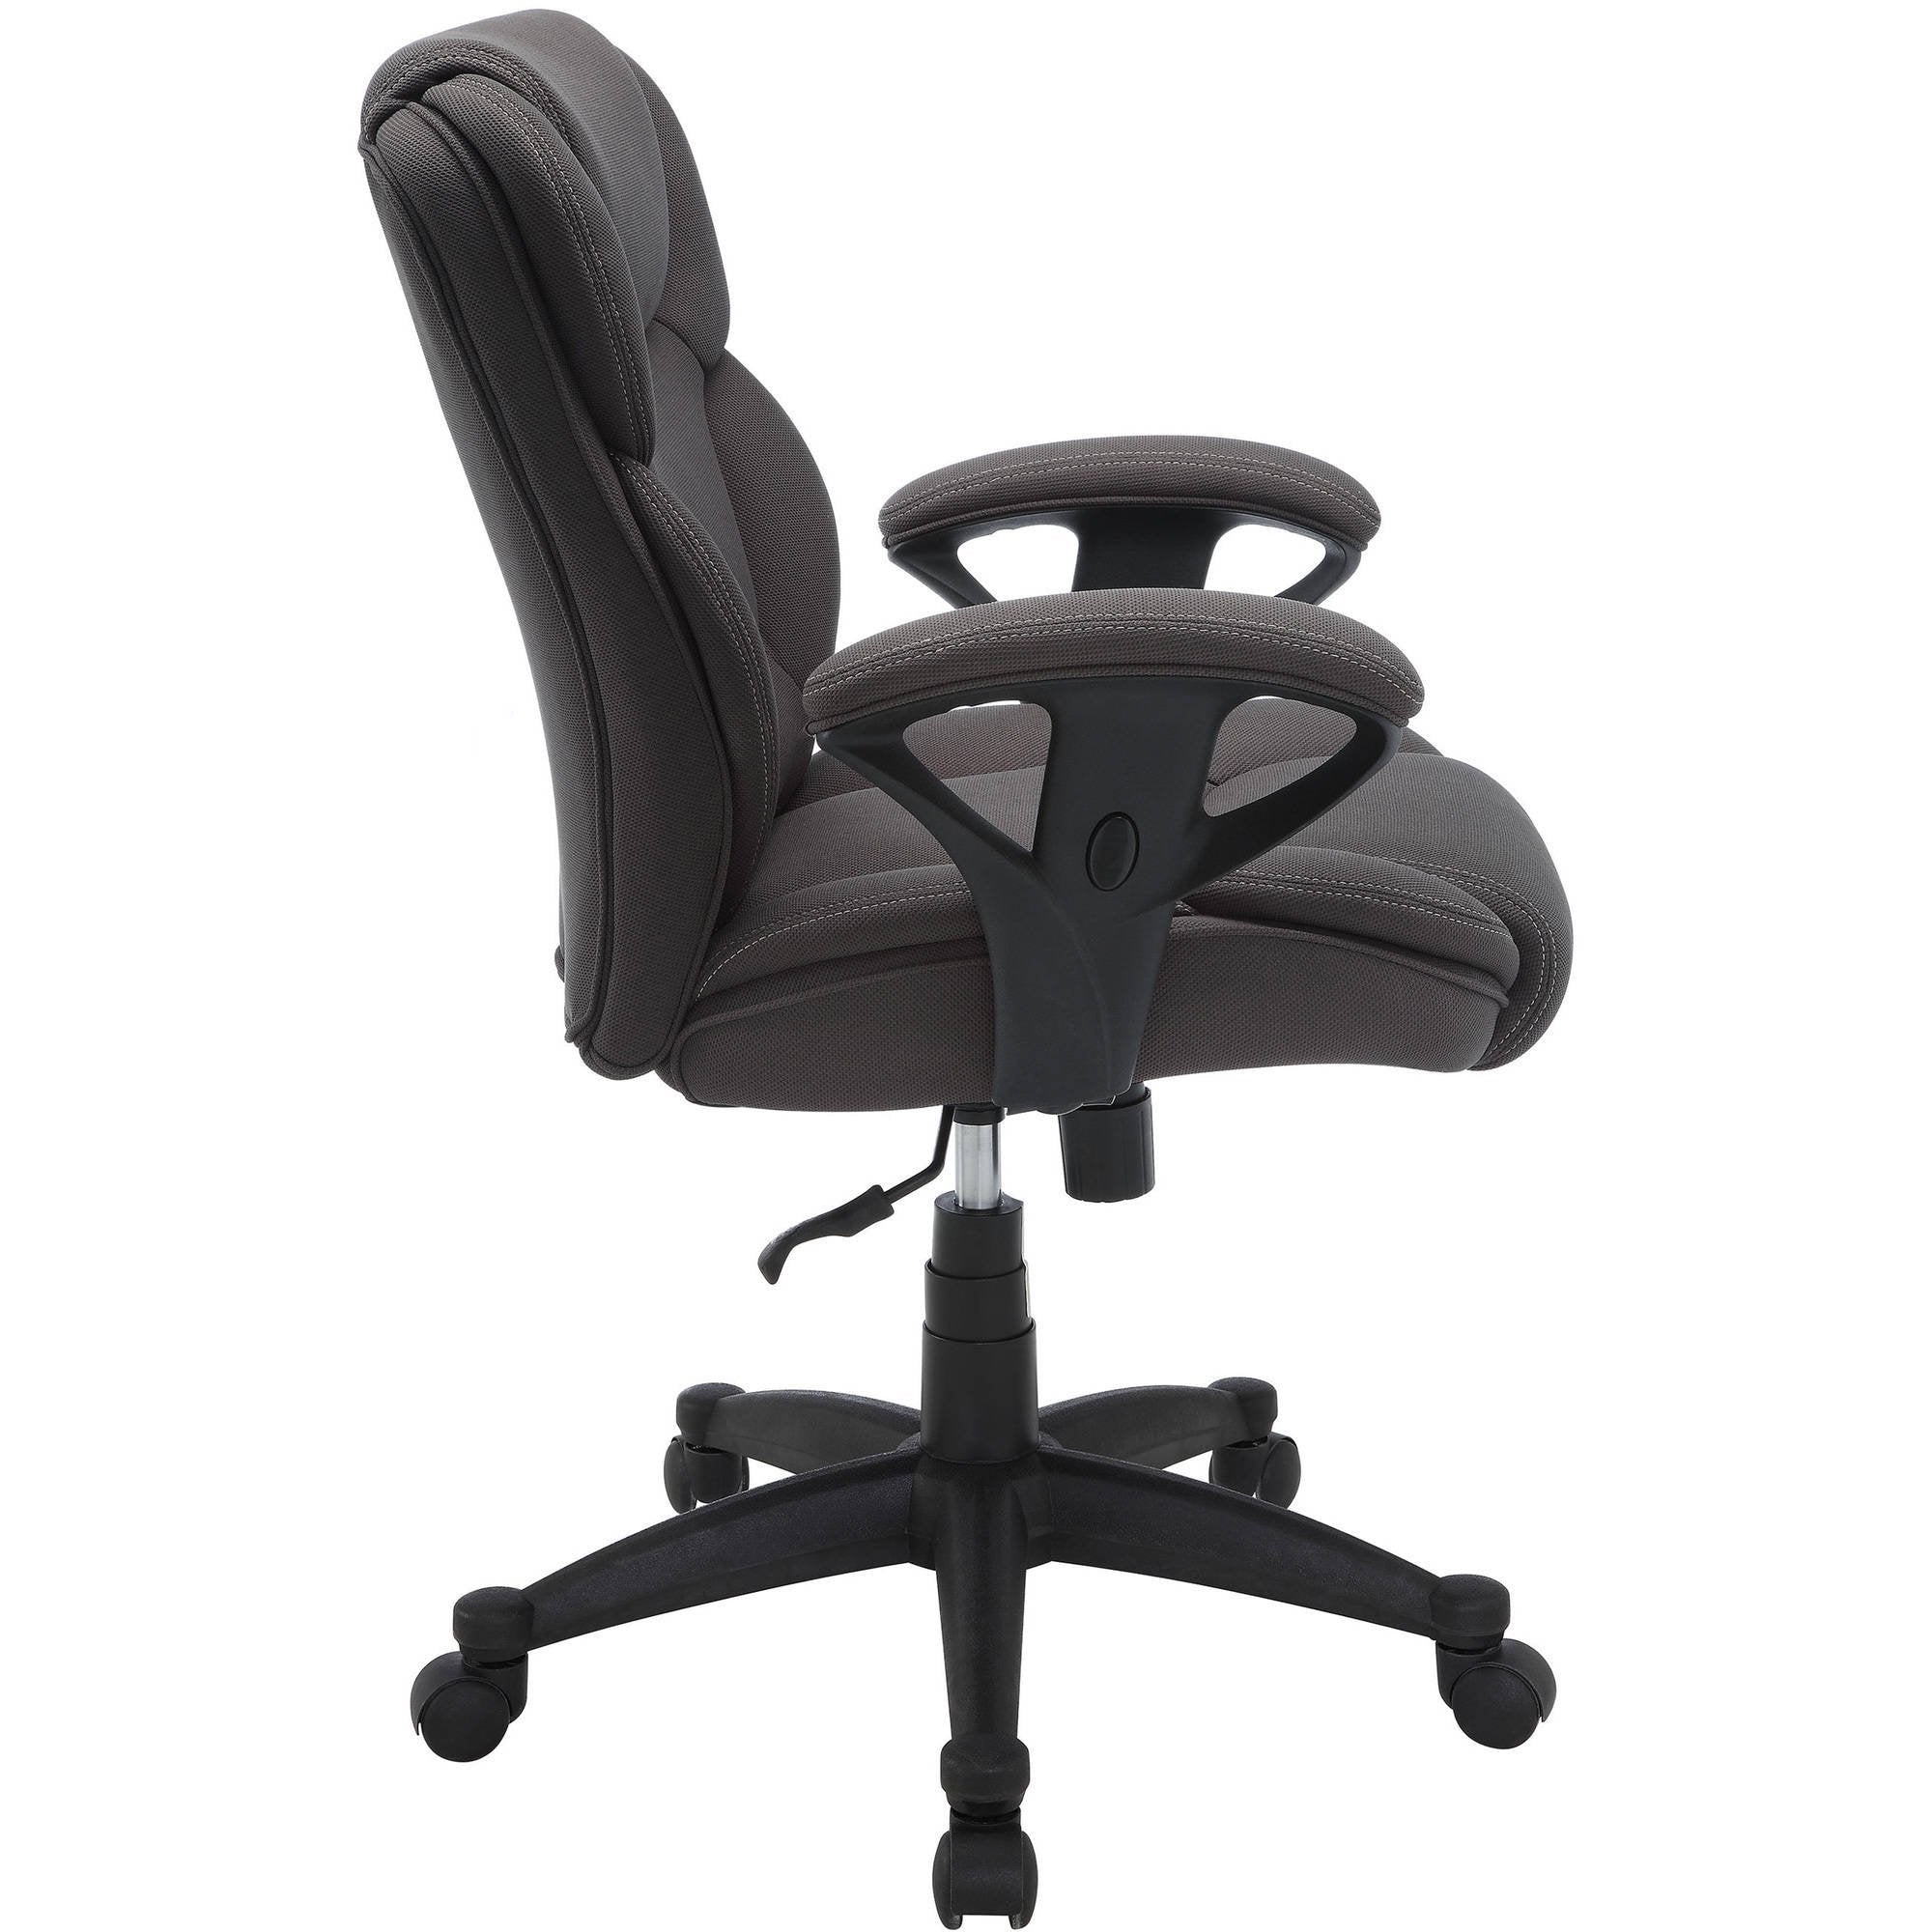 Big Fabric Manager Office Work Chair, Adjustable Seat Padded Armrests 300 lbs-Chairs & Stools-AULEY